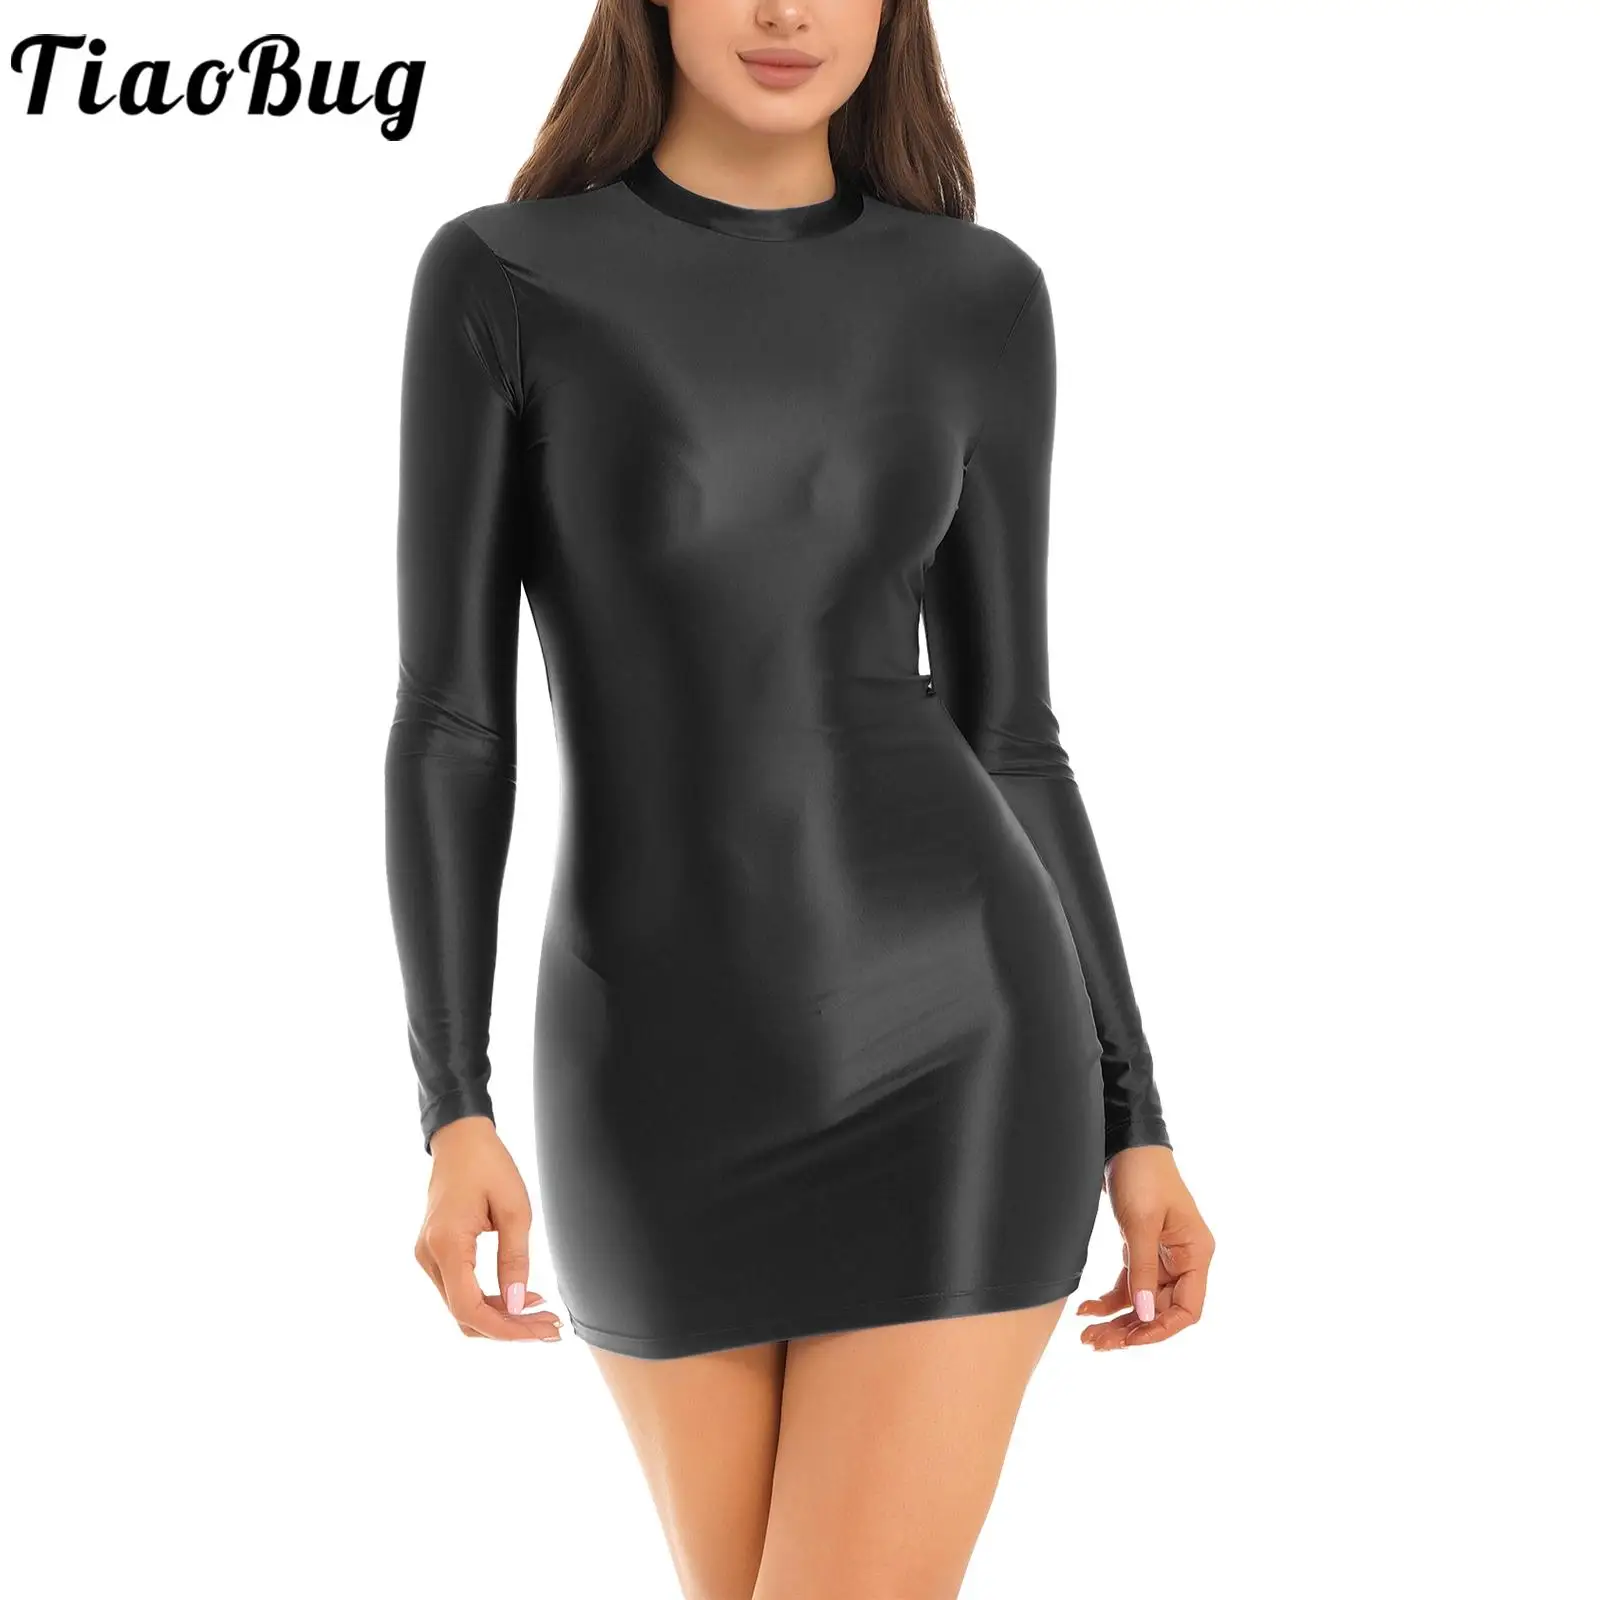 sexy womens deep v tight tight pencil dress lace patchwork see through bodycon mini dresses ol lingerie party club stage wear Women Sexy Oil Glossy Micro Mini Dress Tight Party Dress Pencil Bodycon Dress Club Outfit Nightwear Pole Dancing Costume